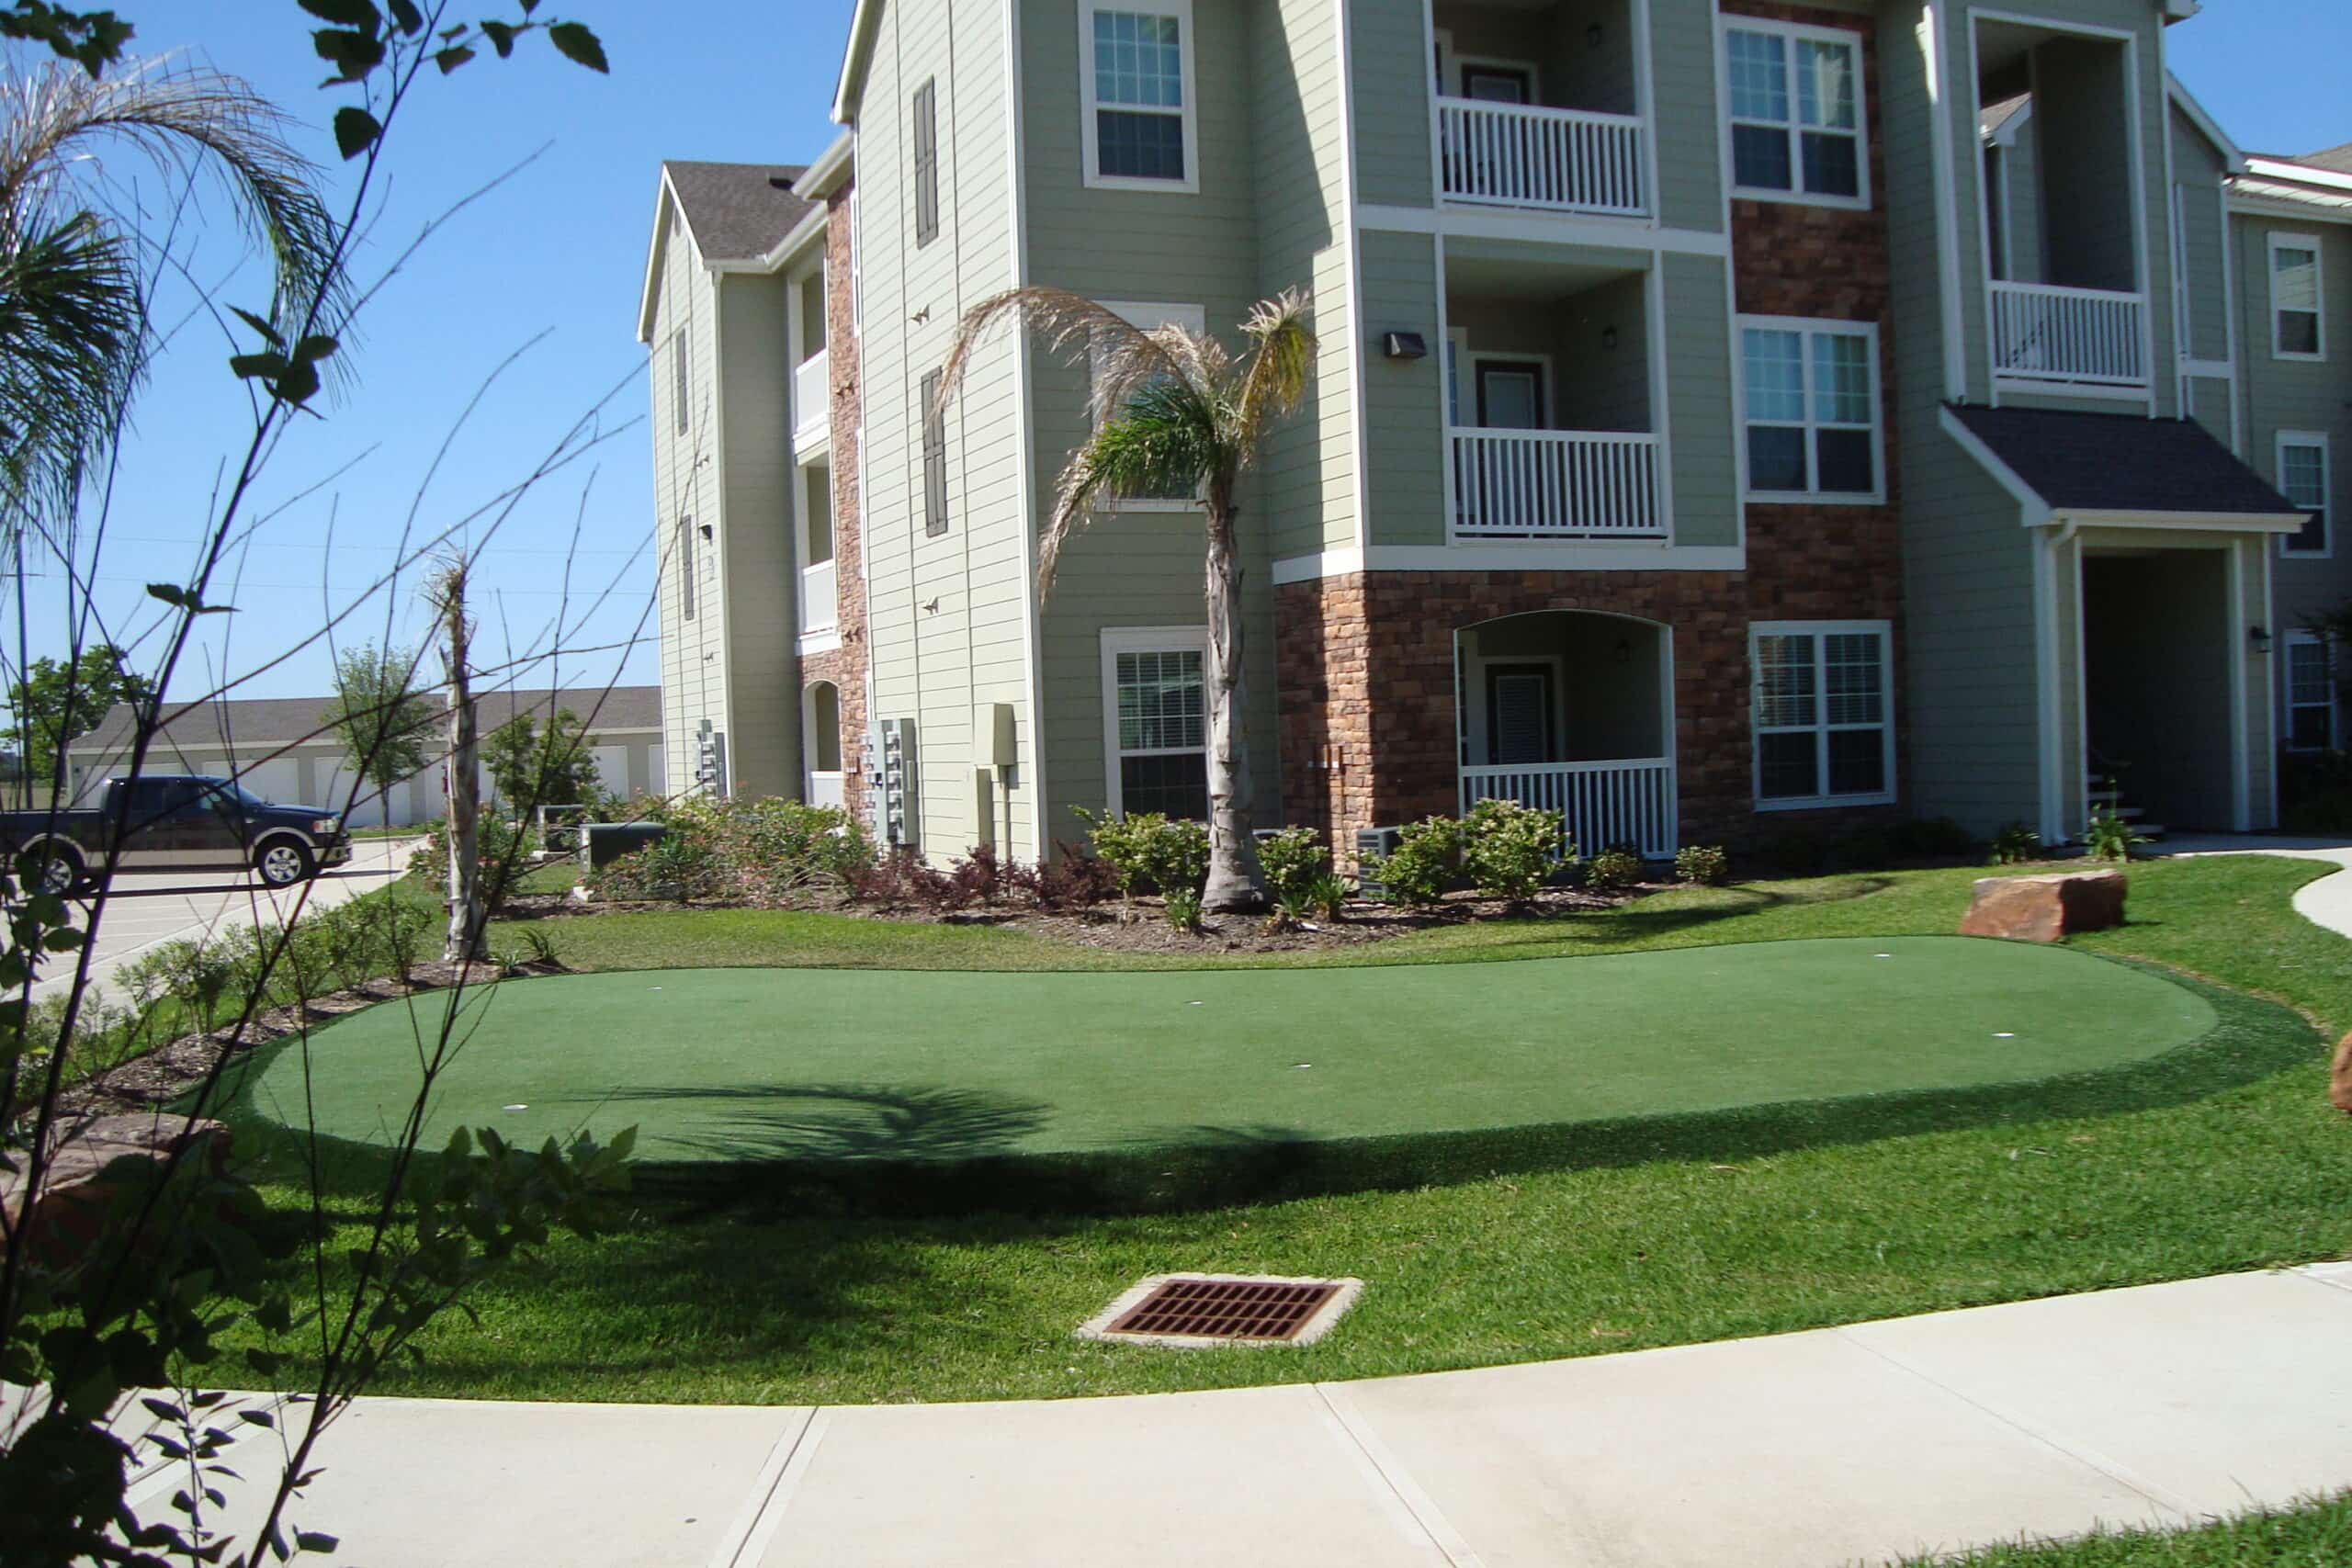 15-750-sq.-ft.-tour-quality-chipping-putting-green-with-chipping-areas.-Stone-Creek-Apts.-Port-Arthur-scaled.jpg